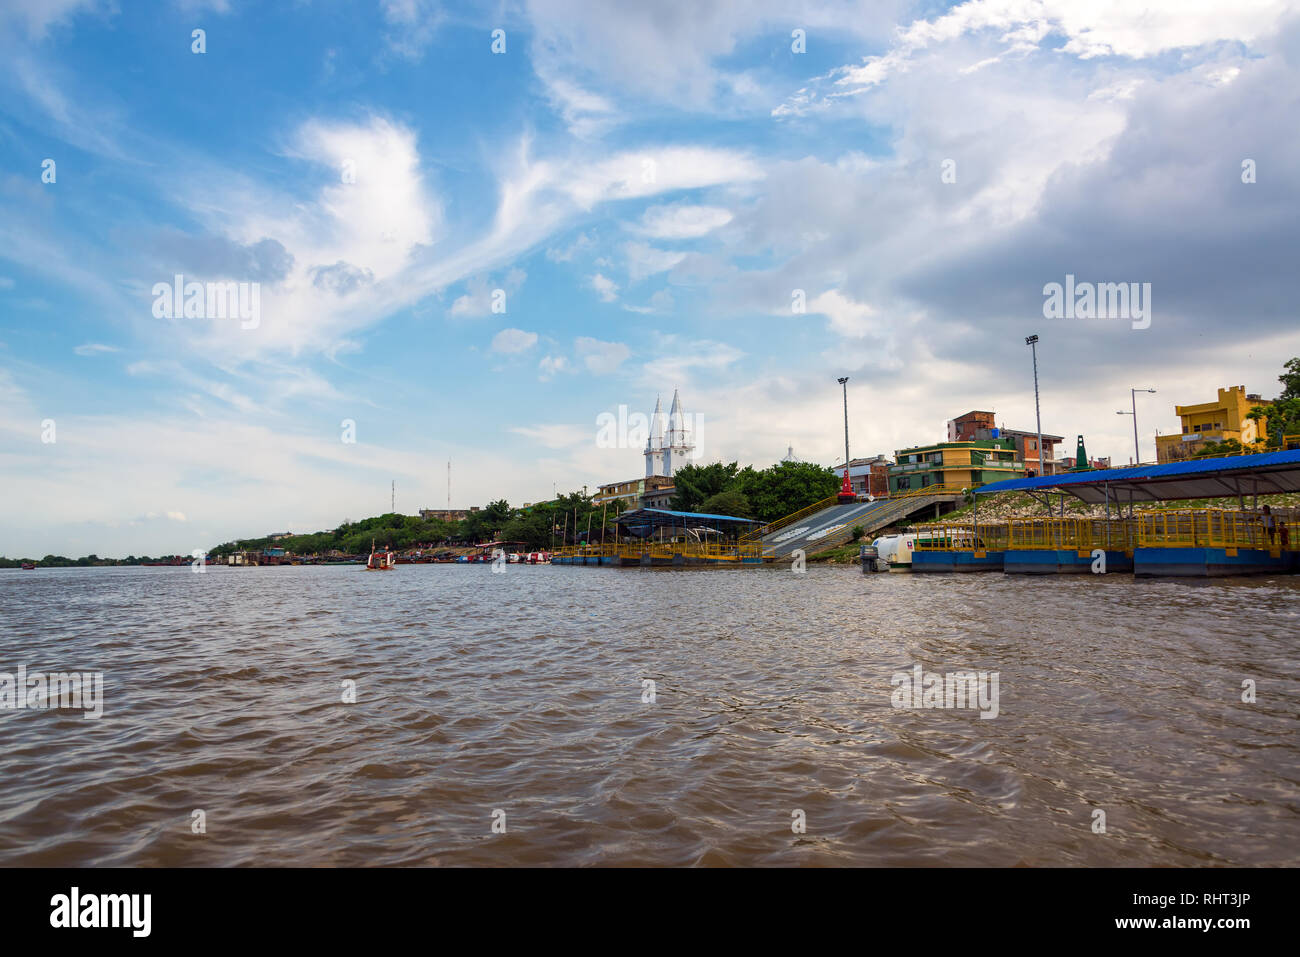 MAGANGUE, COLOMBIA - MAY 26: Port of Magangue, Colombia on the Magdalena River on May 26, 2016 Stock Photo